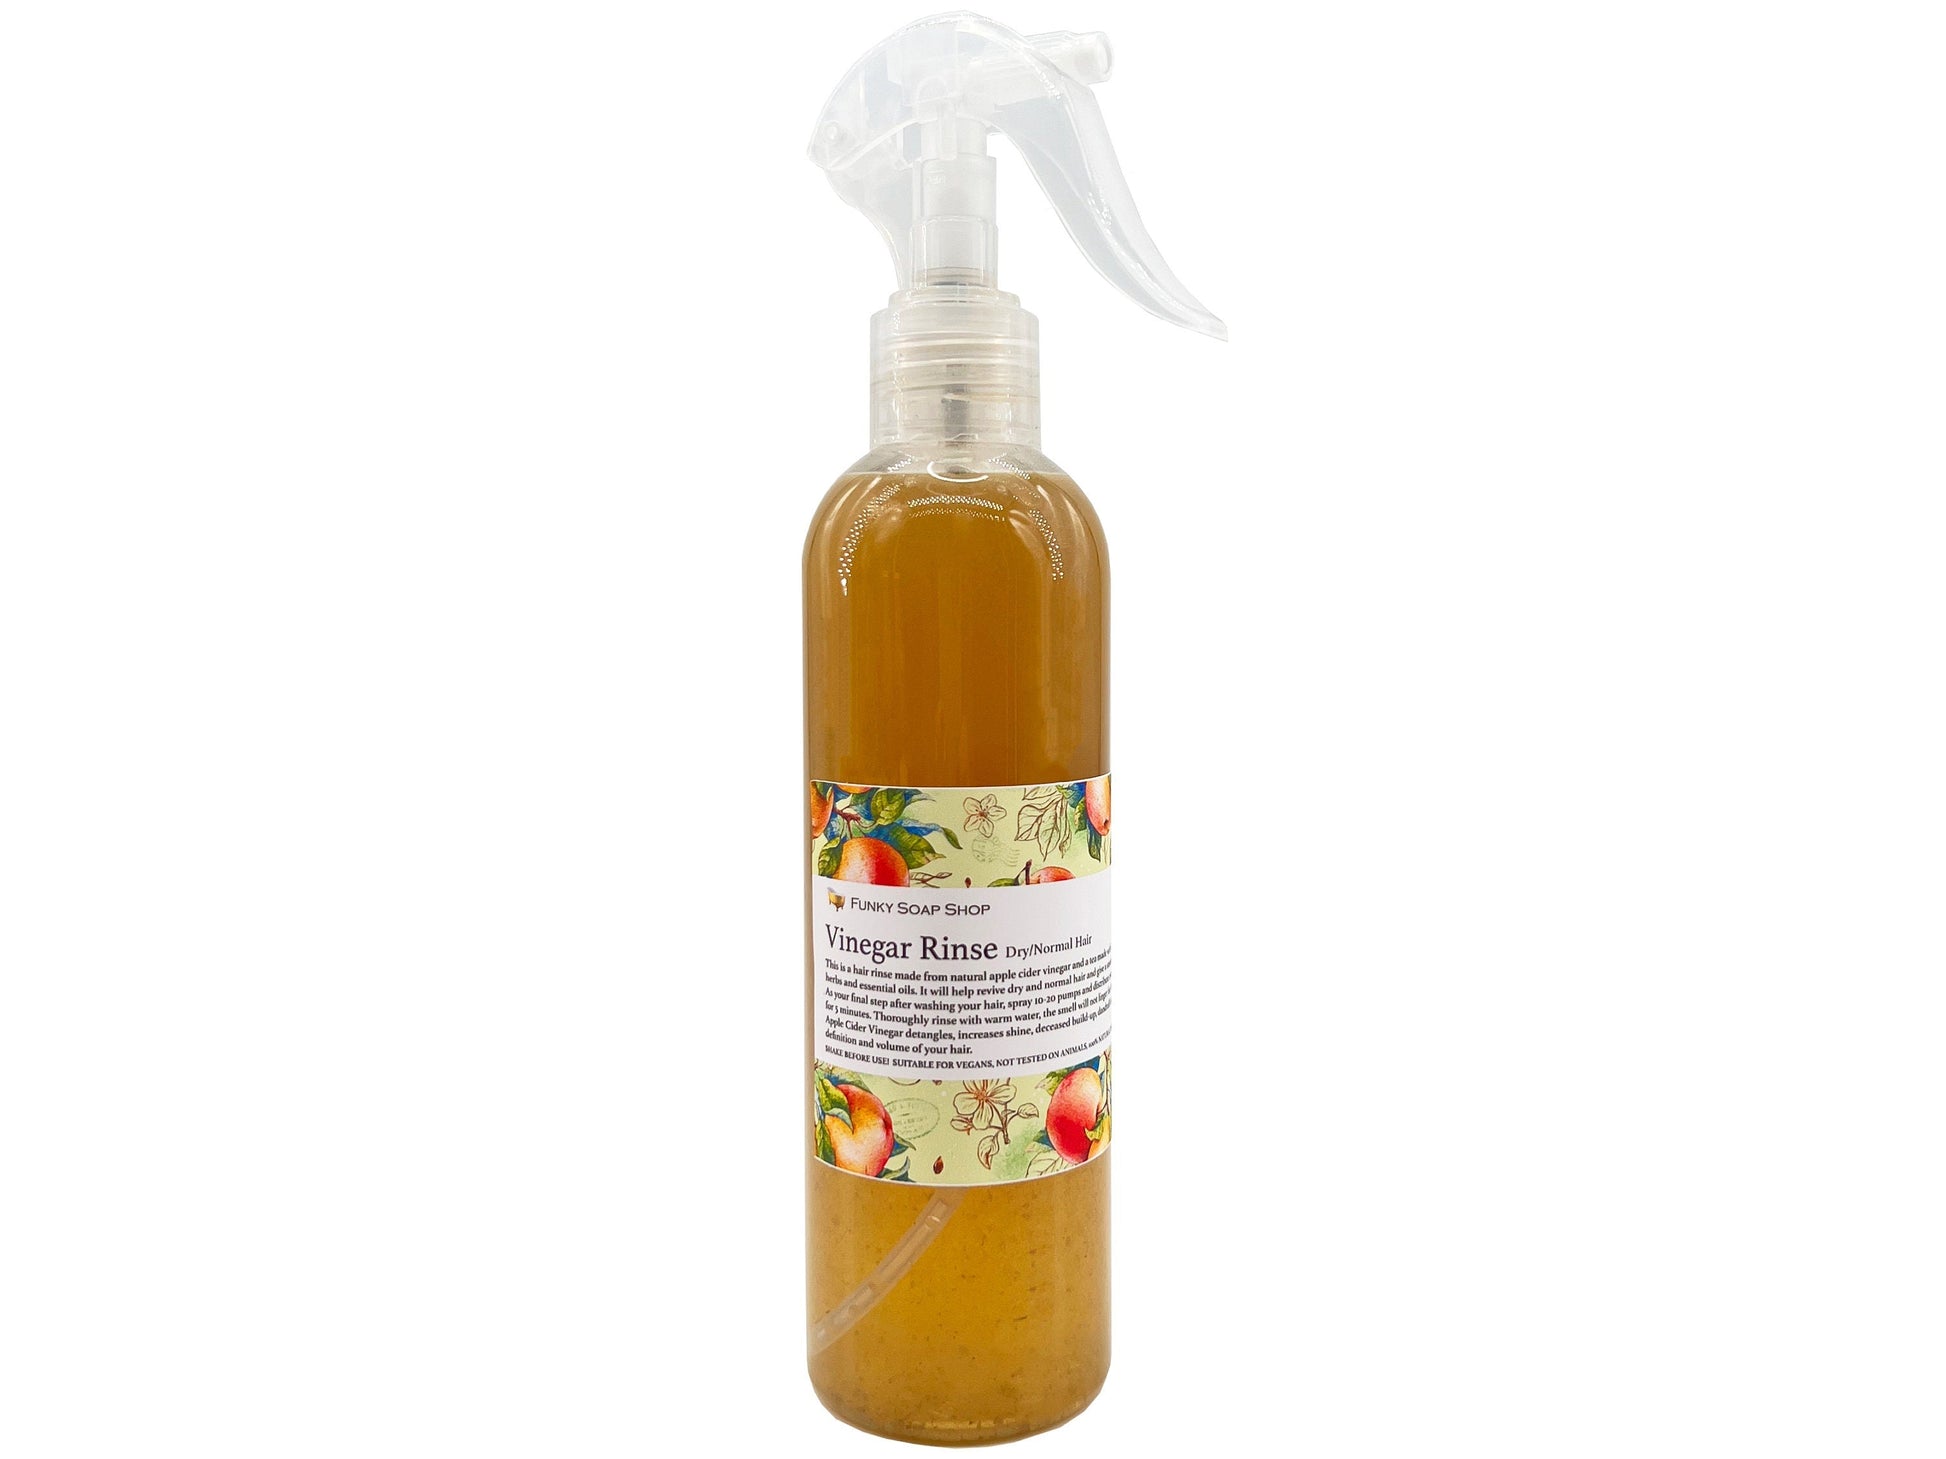 Vinegar Rinse For Dry/Normal Hair, 100% Natural & Free Of Chemicals, 250ml - Funky Soap Shop